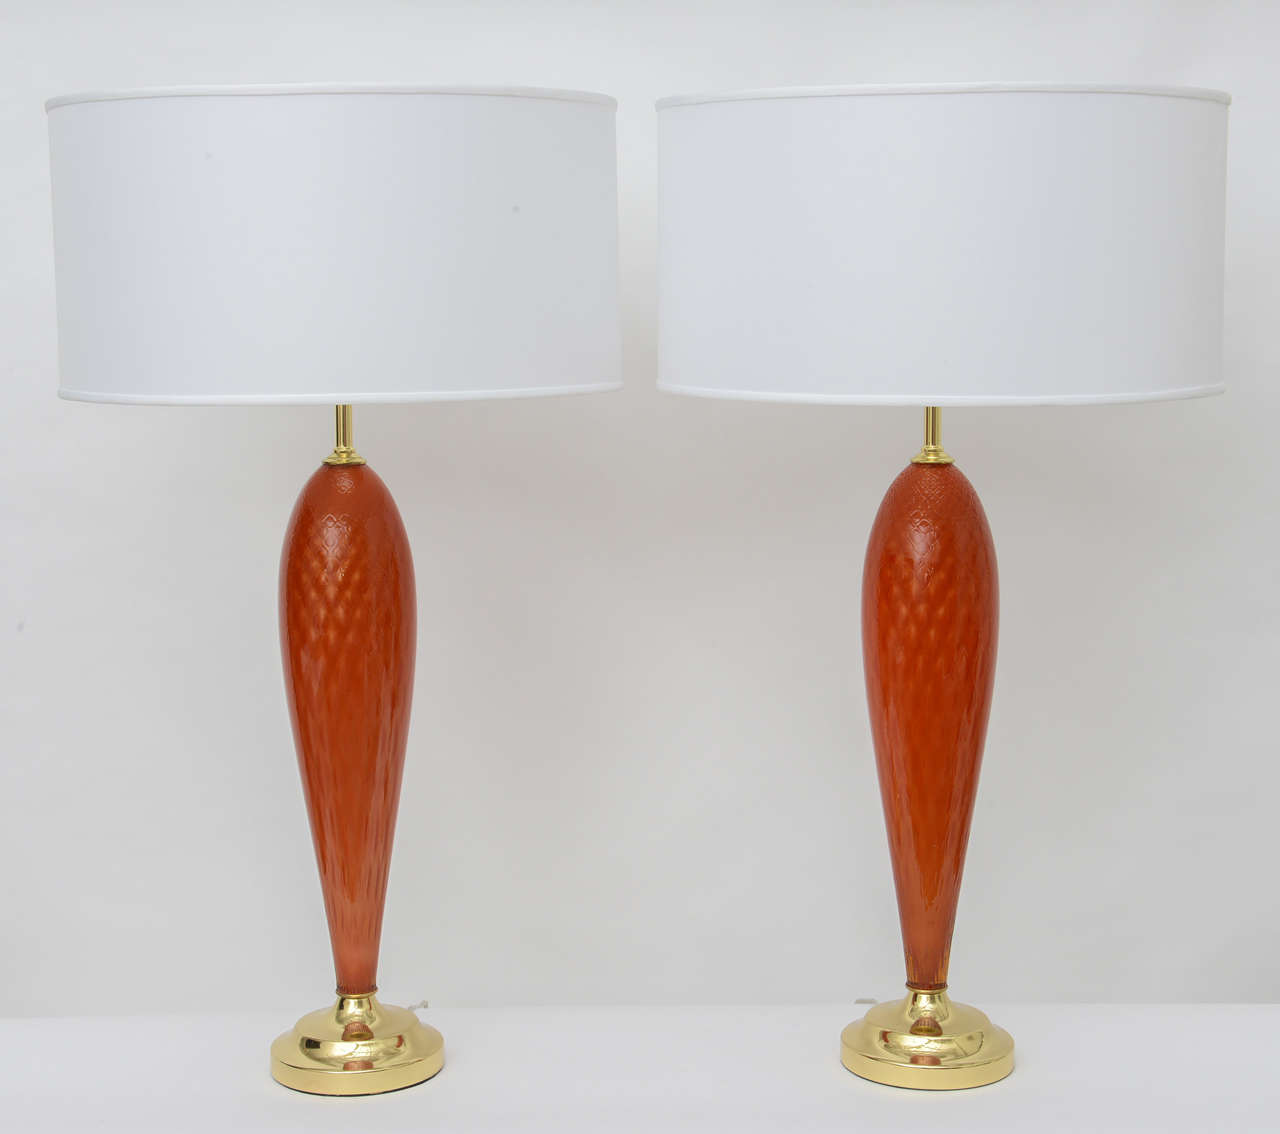 Pair of hand blown Murano glass lamps in rich textured orange. Newly rewired and appointed with brass bases and sockets. Sold as pair.  Shades sold separately.